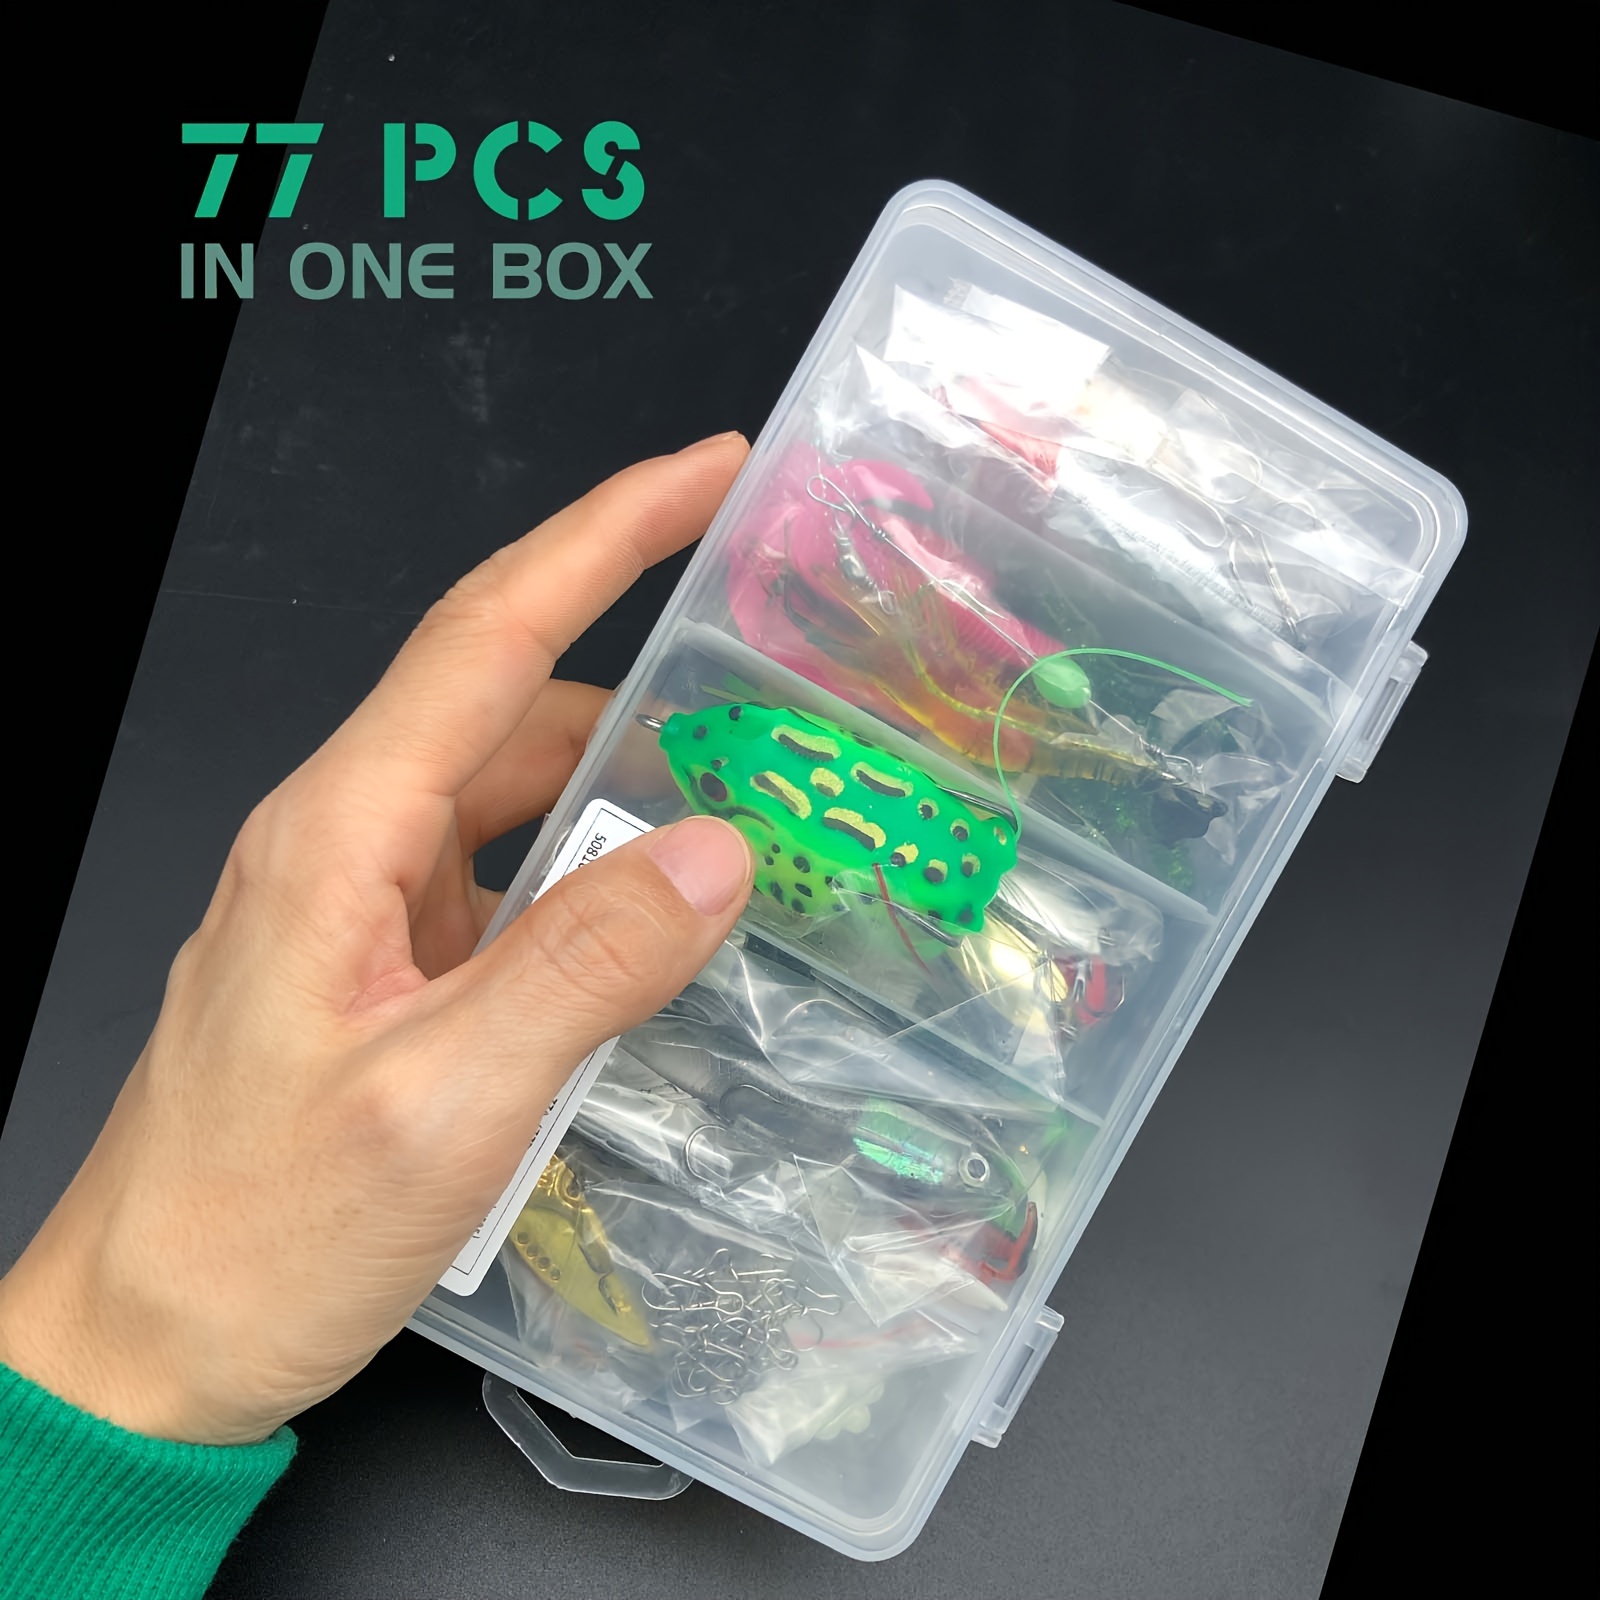 Fishing Lures Tackle Box Bass Fishing Kit,Saltwater and Freshwater Lures  Fishing Gear Including Fishing Accessories and Fishing Equipment for Bass,Trout,  Salmon 92pcs Fishing Tackle Box